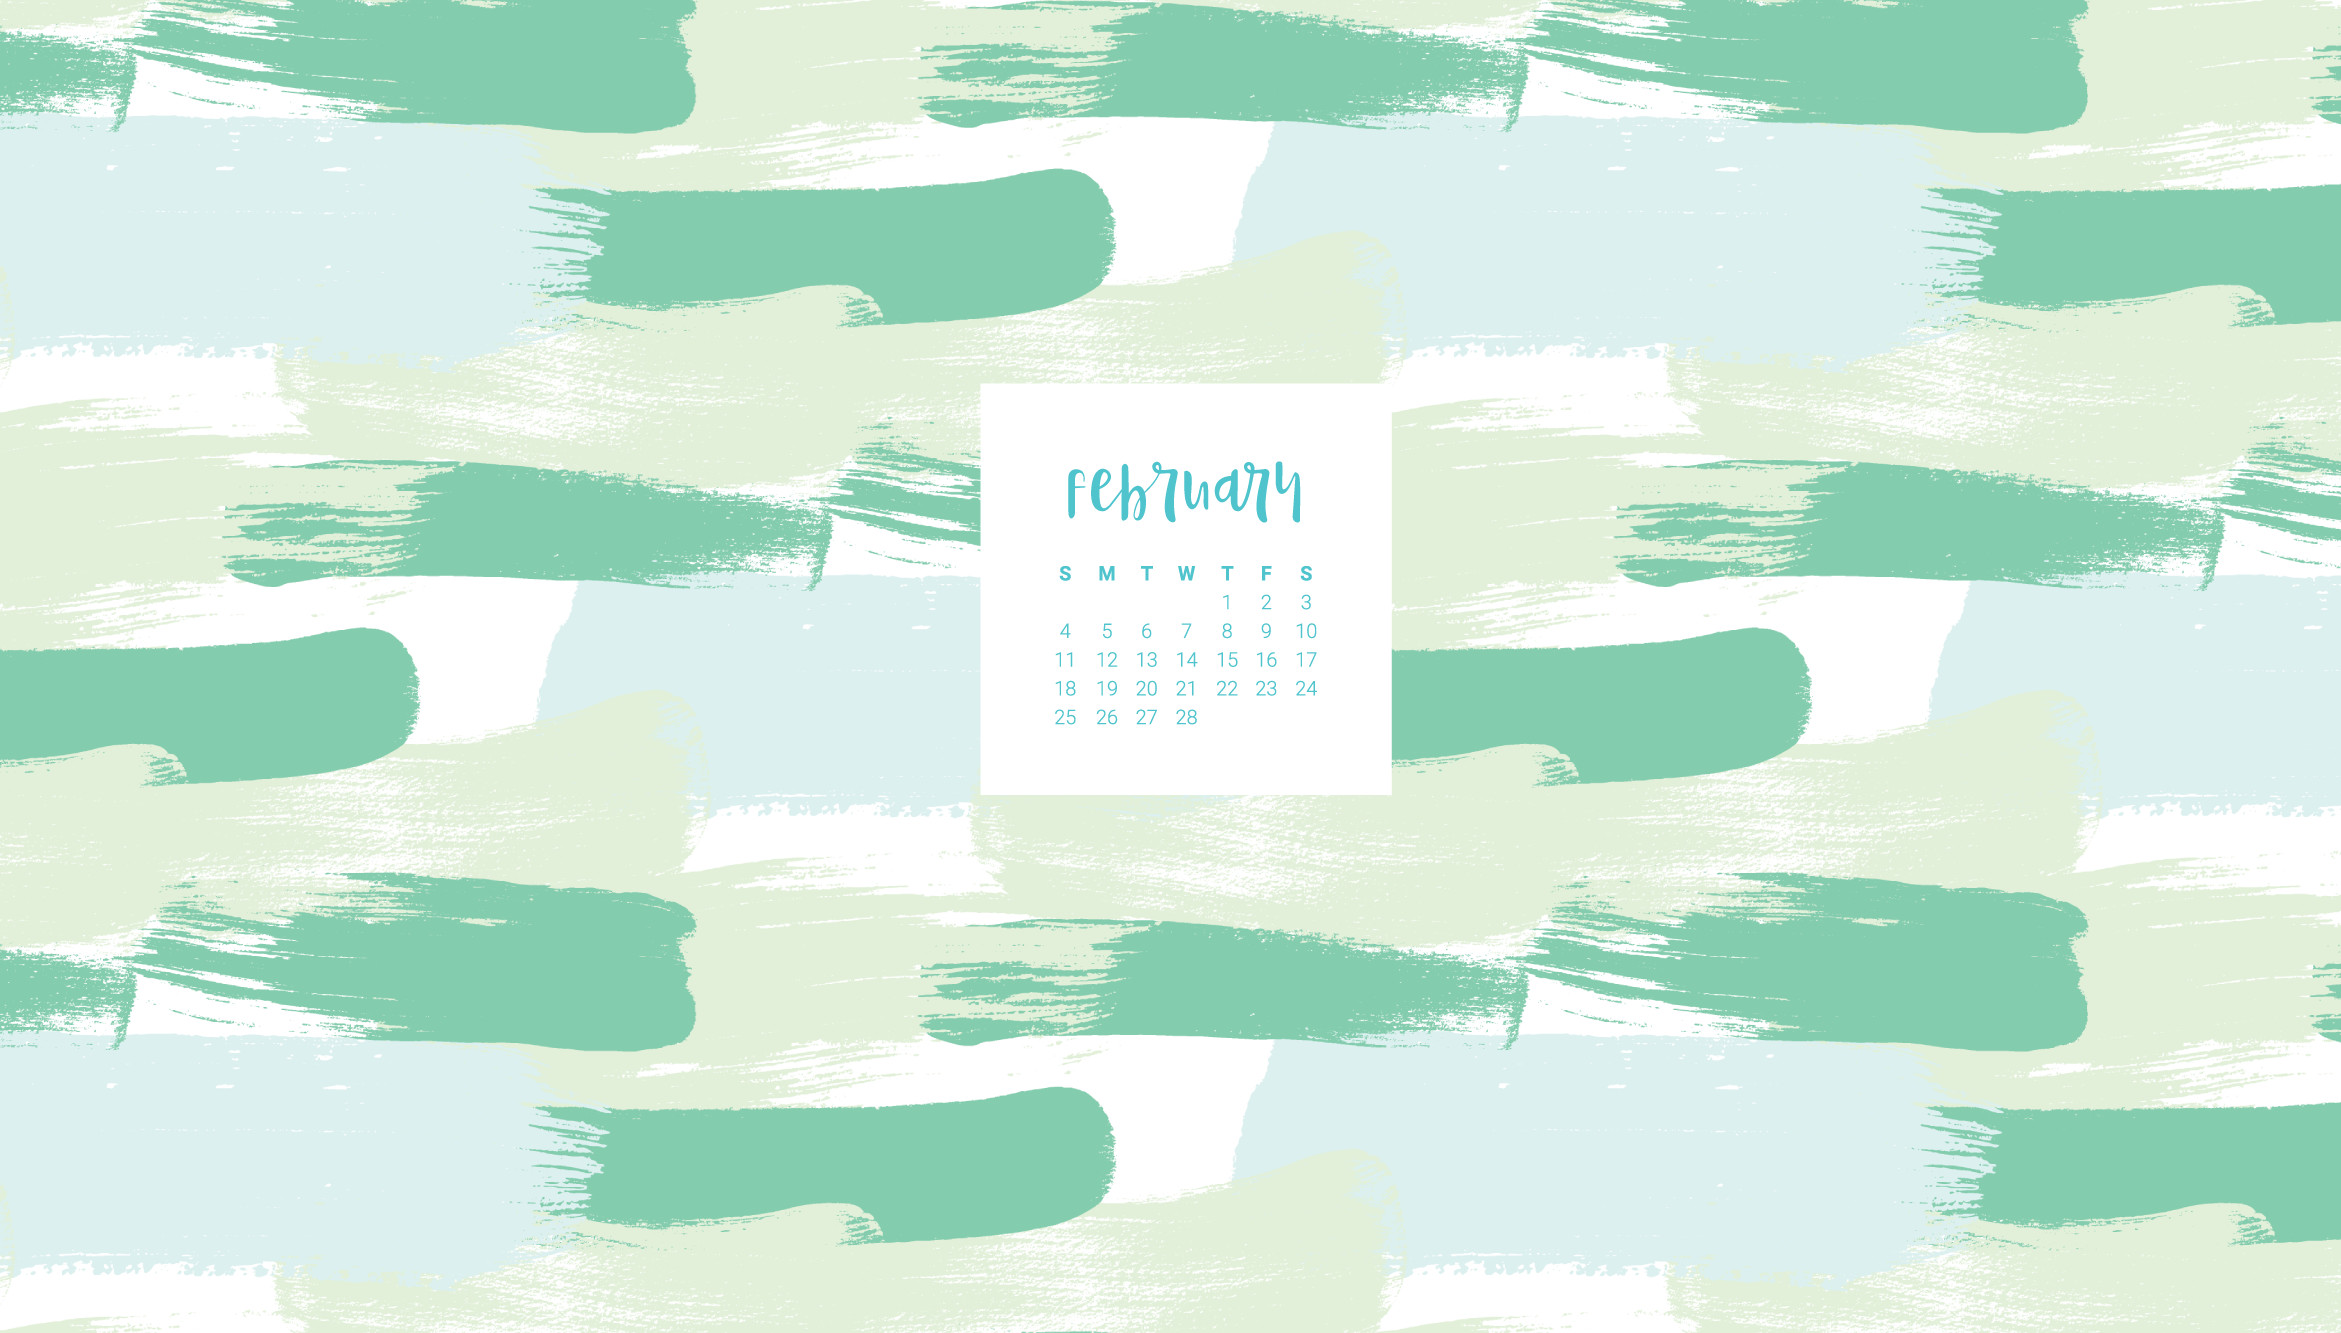 2341x1333 Download your FREE February 2018 desktop wallpaper calendars! There are 5  designs to choose from for desktop or mobile in both Sunday and Monday  starts.